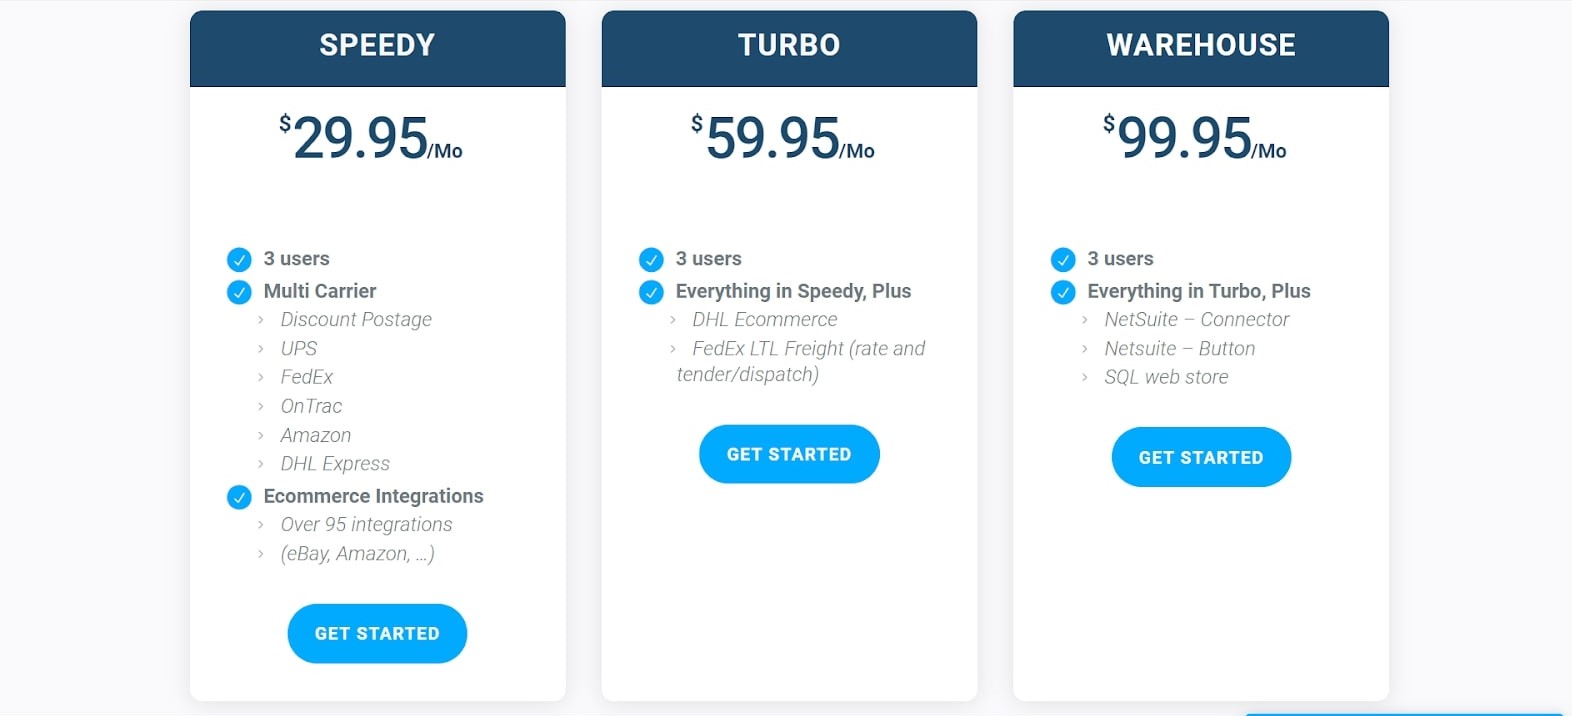 ShipRush’s pricing plans